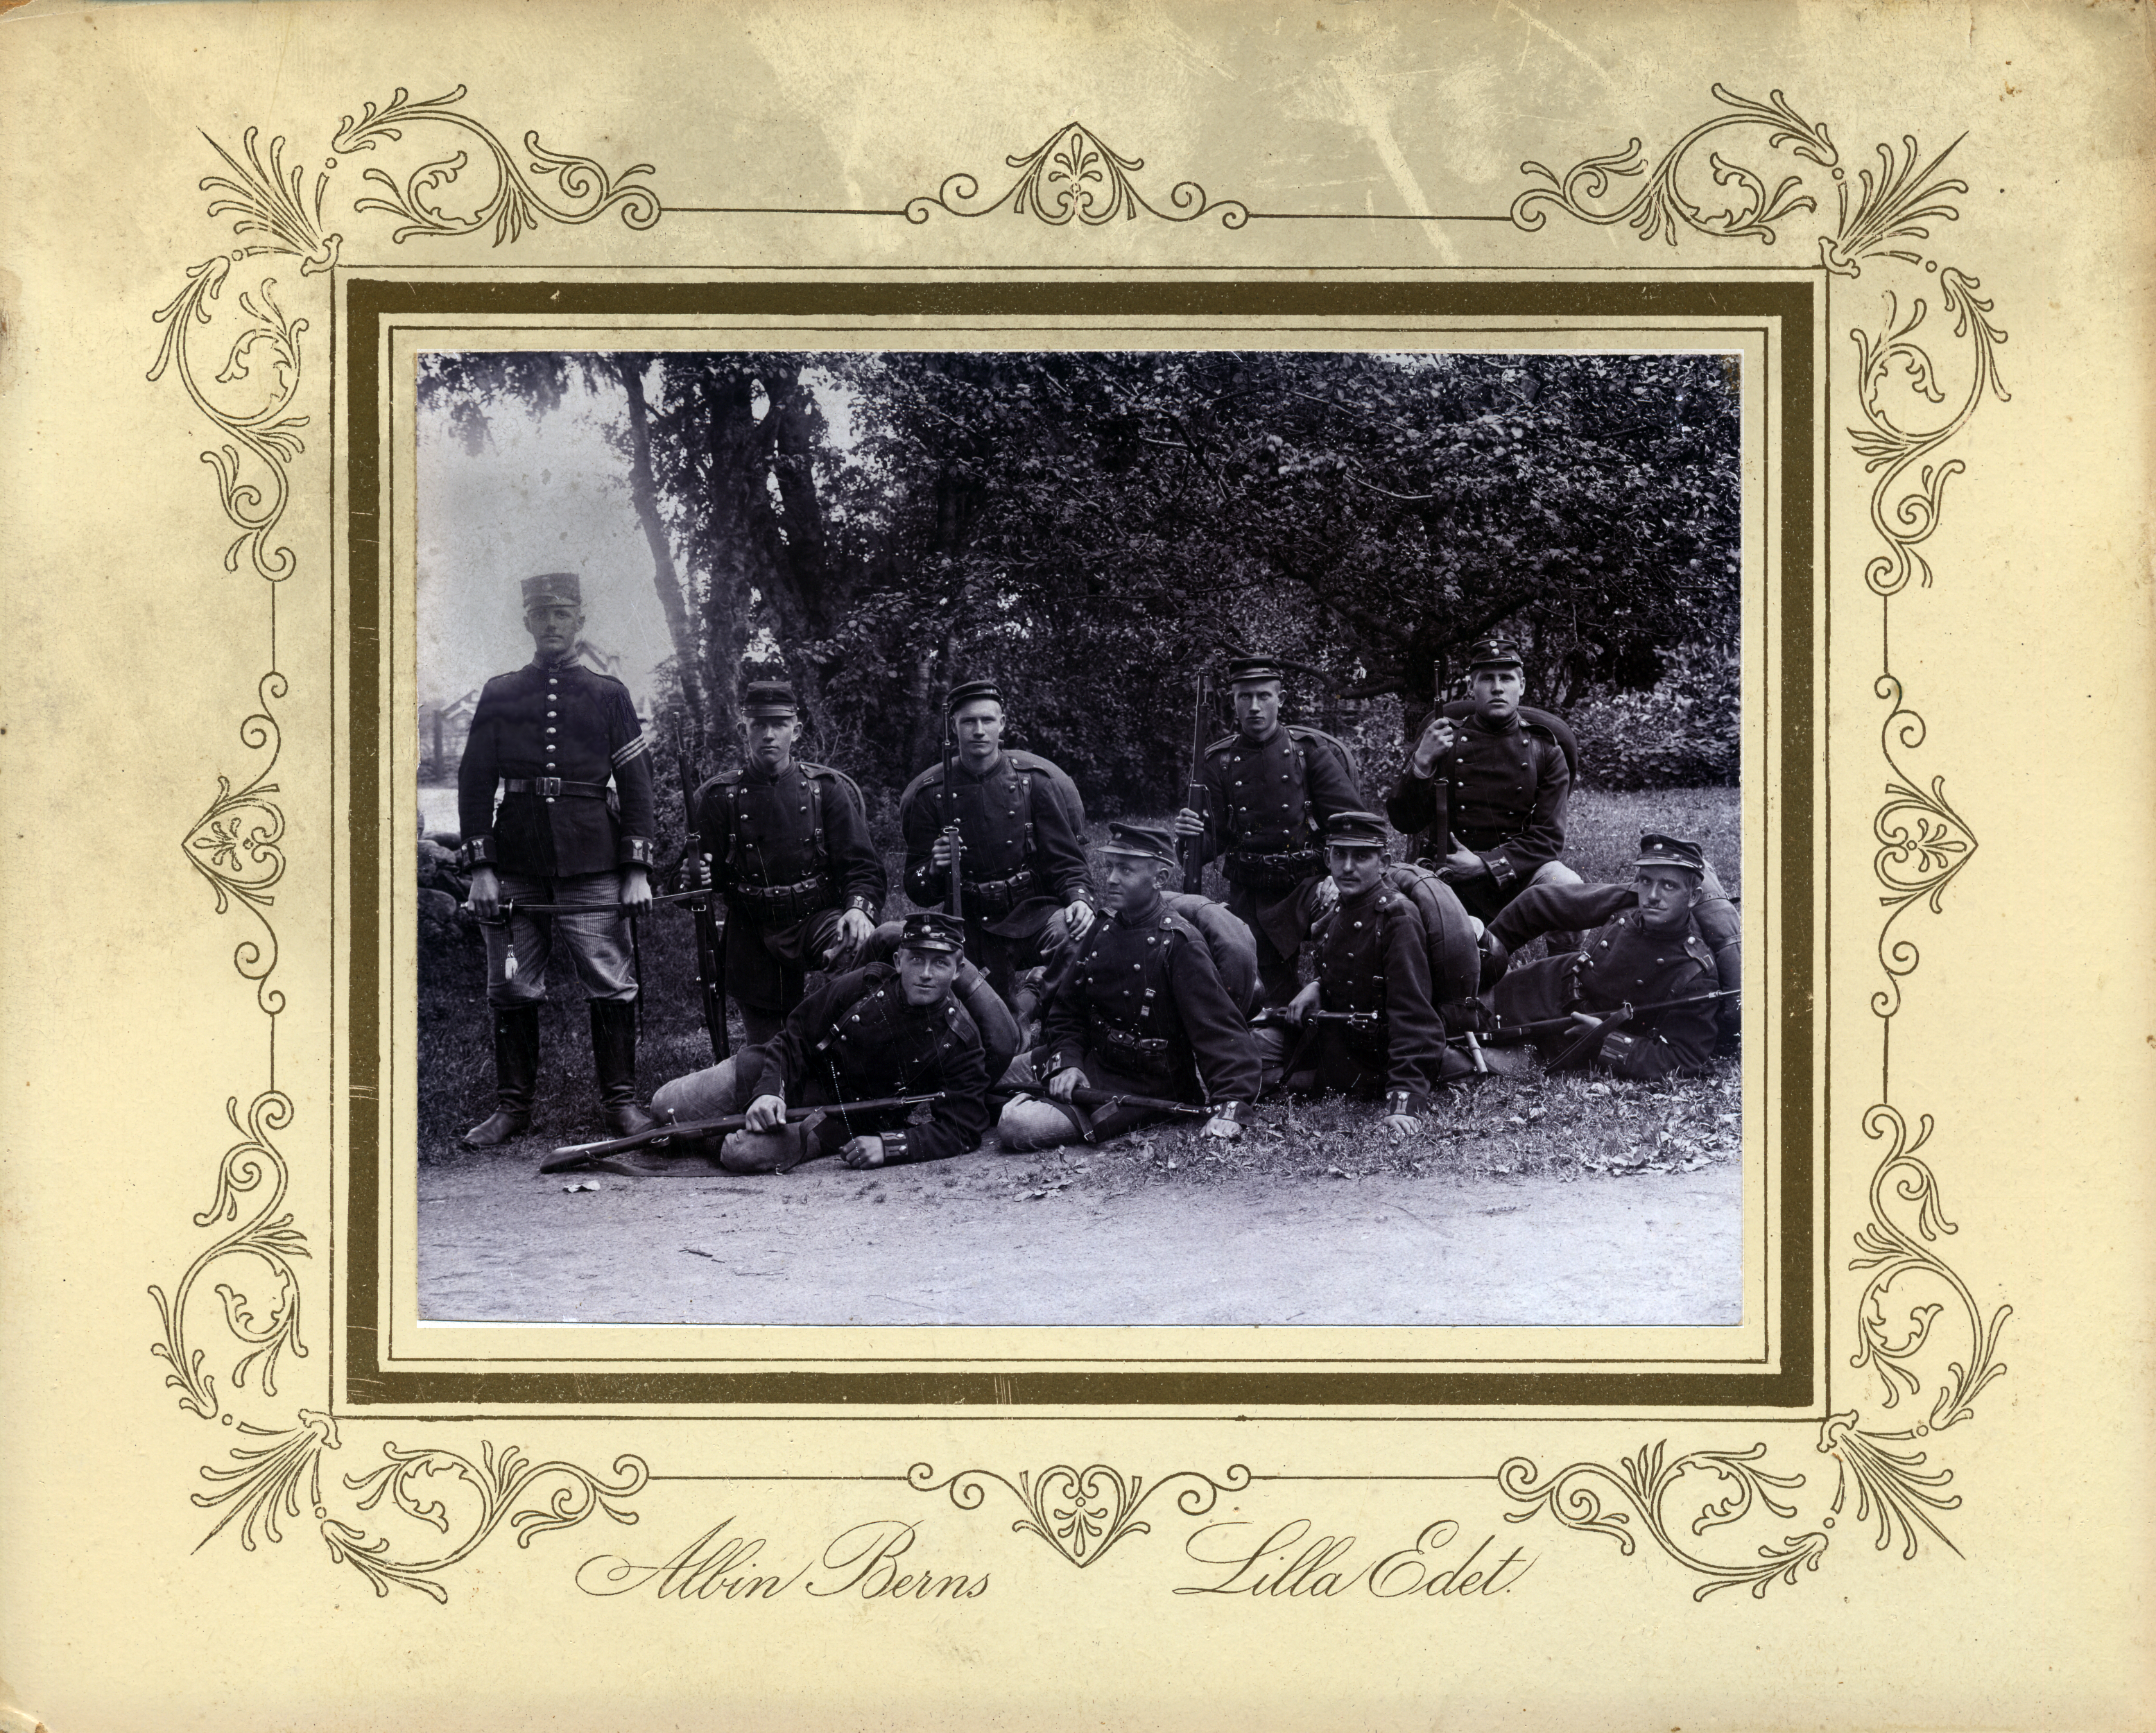 Possibly Victor and other soldiers in the Swedish army